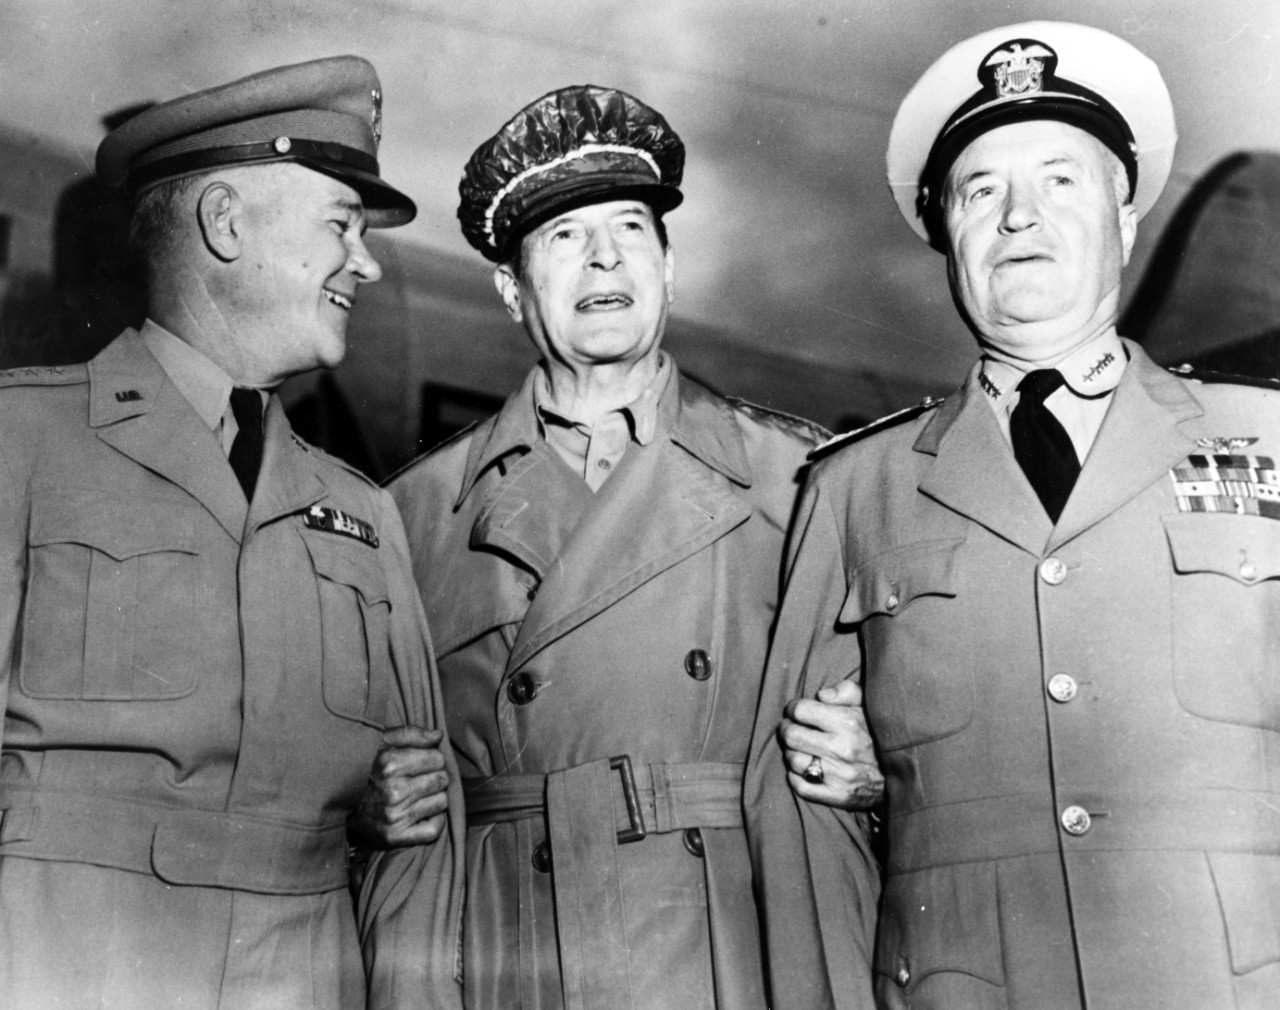 Photo #: 80-G-422492  General of the Army Douglas MacArthur, Commander in Chief, Far East, (center)  